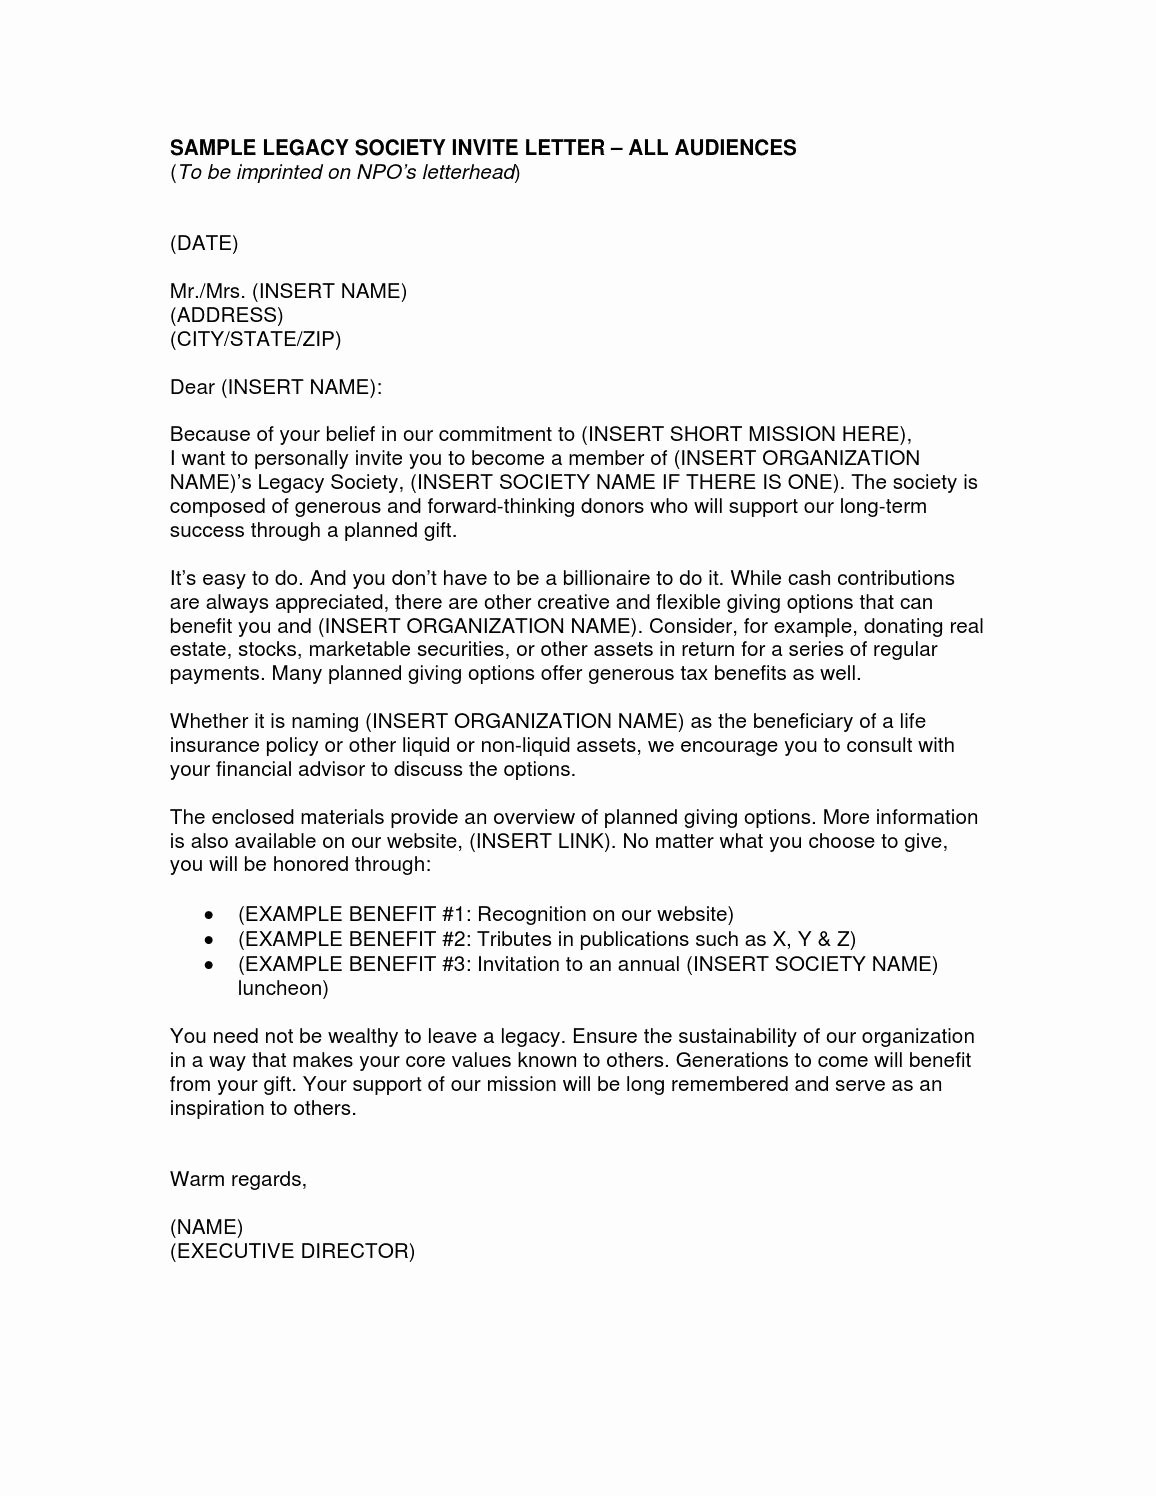 Long Term Missionary Support Letter Template Inspirational Sample Legacy society Invite Letter – All Audiences by